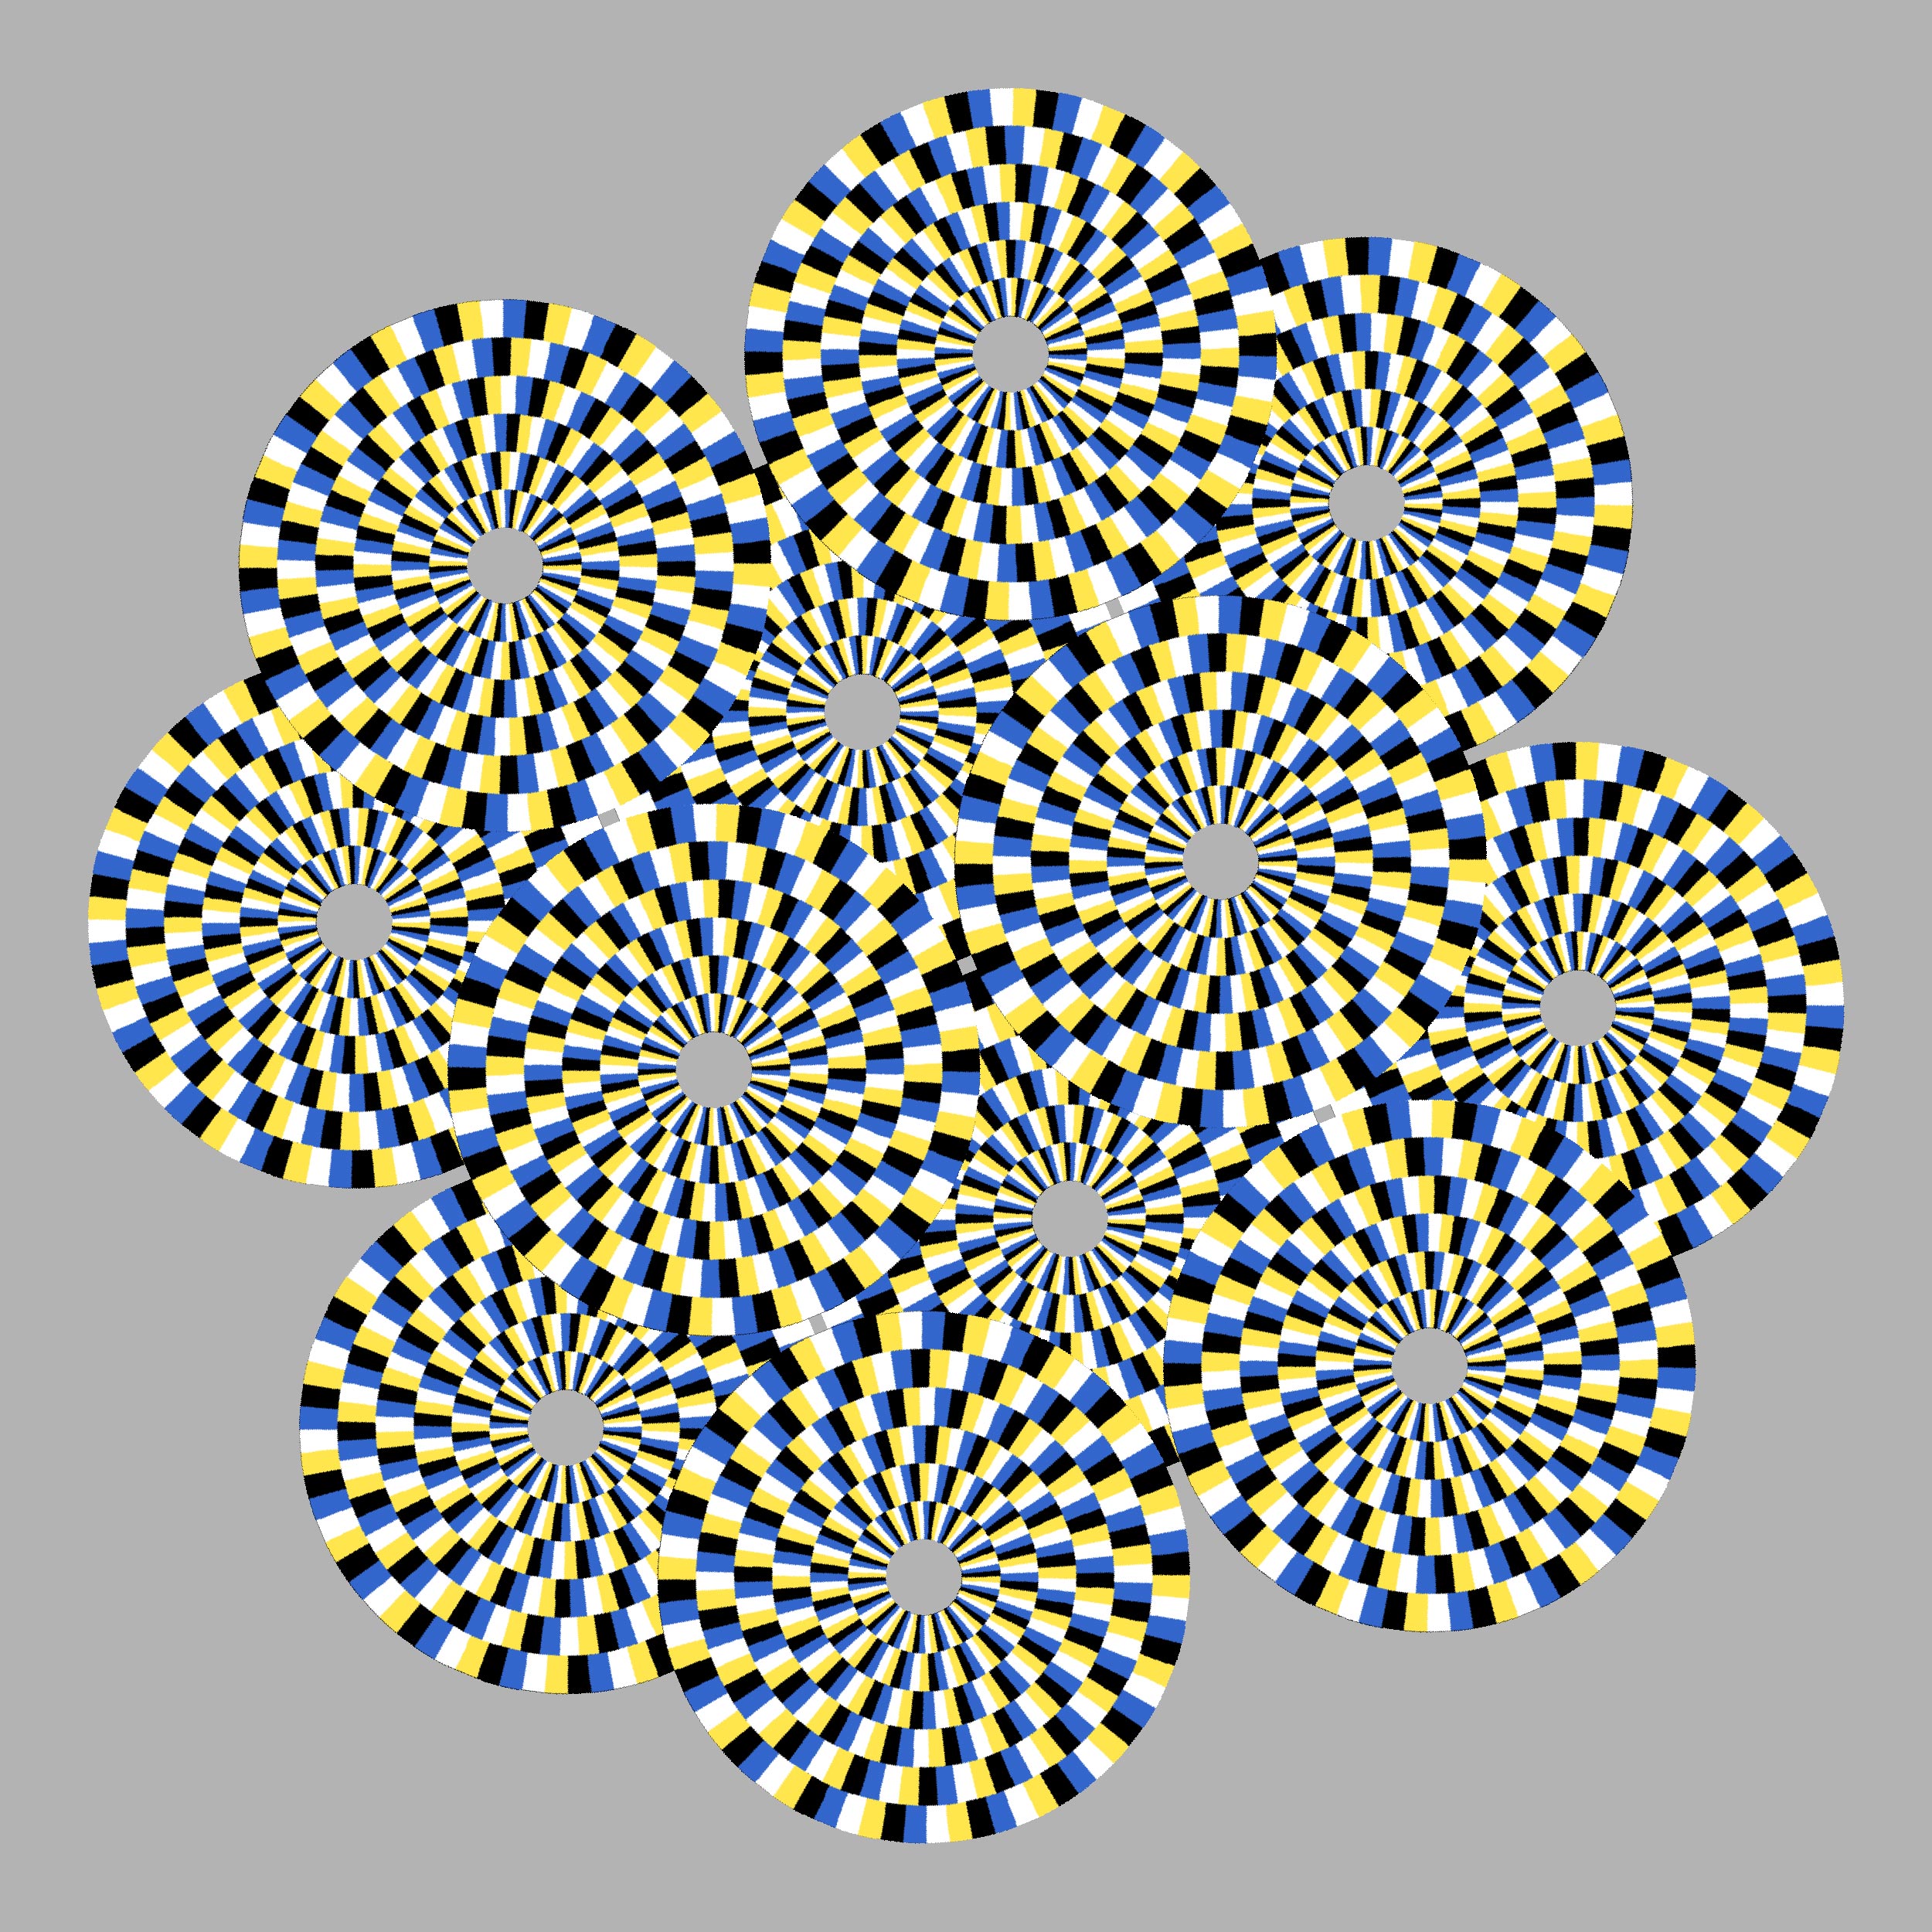 https://scitechdaily.com/images/Rotating-Circles-Optical-Illustion.jpg